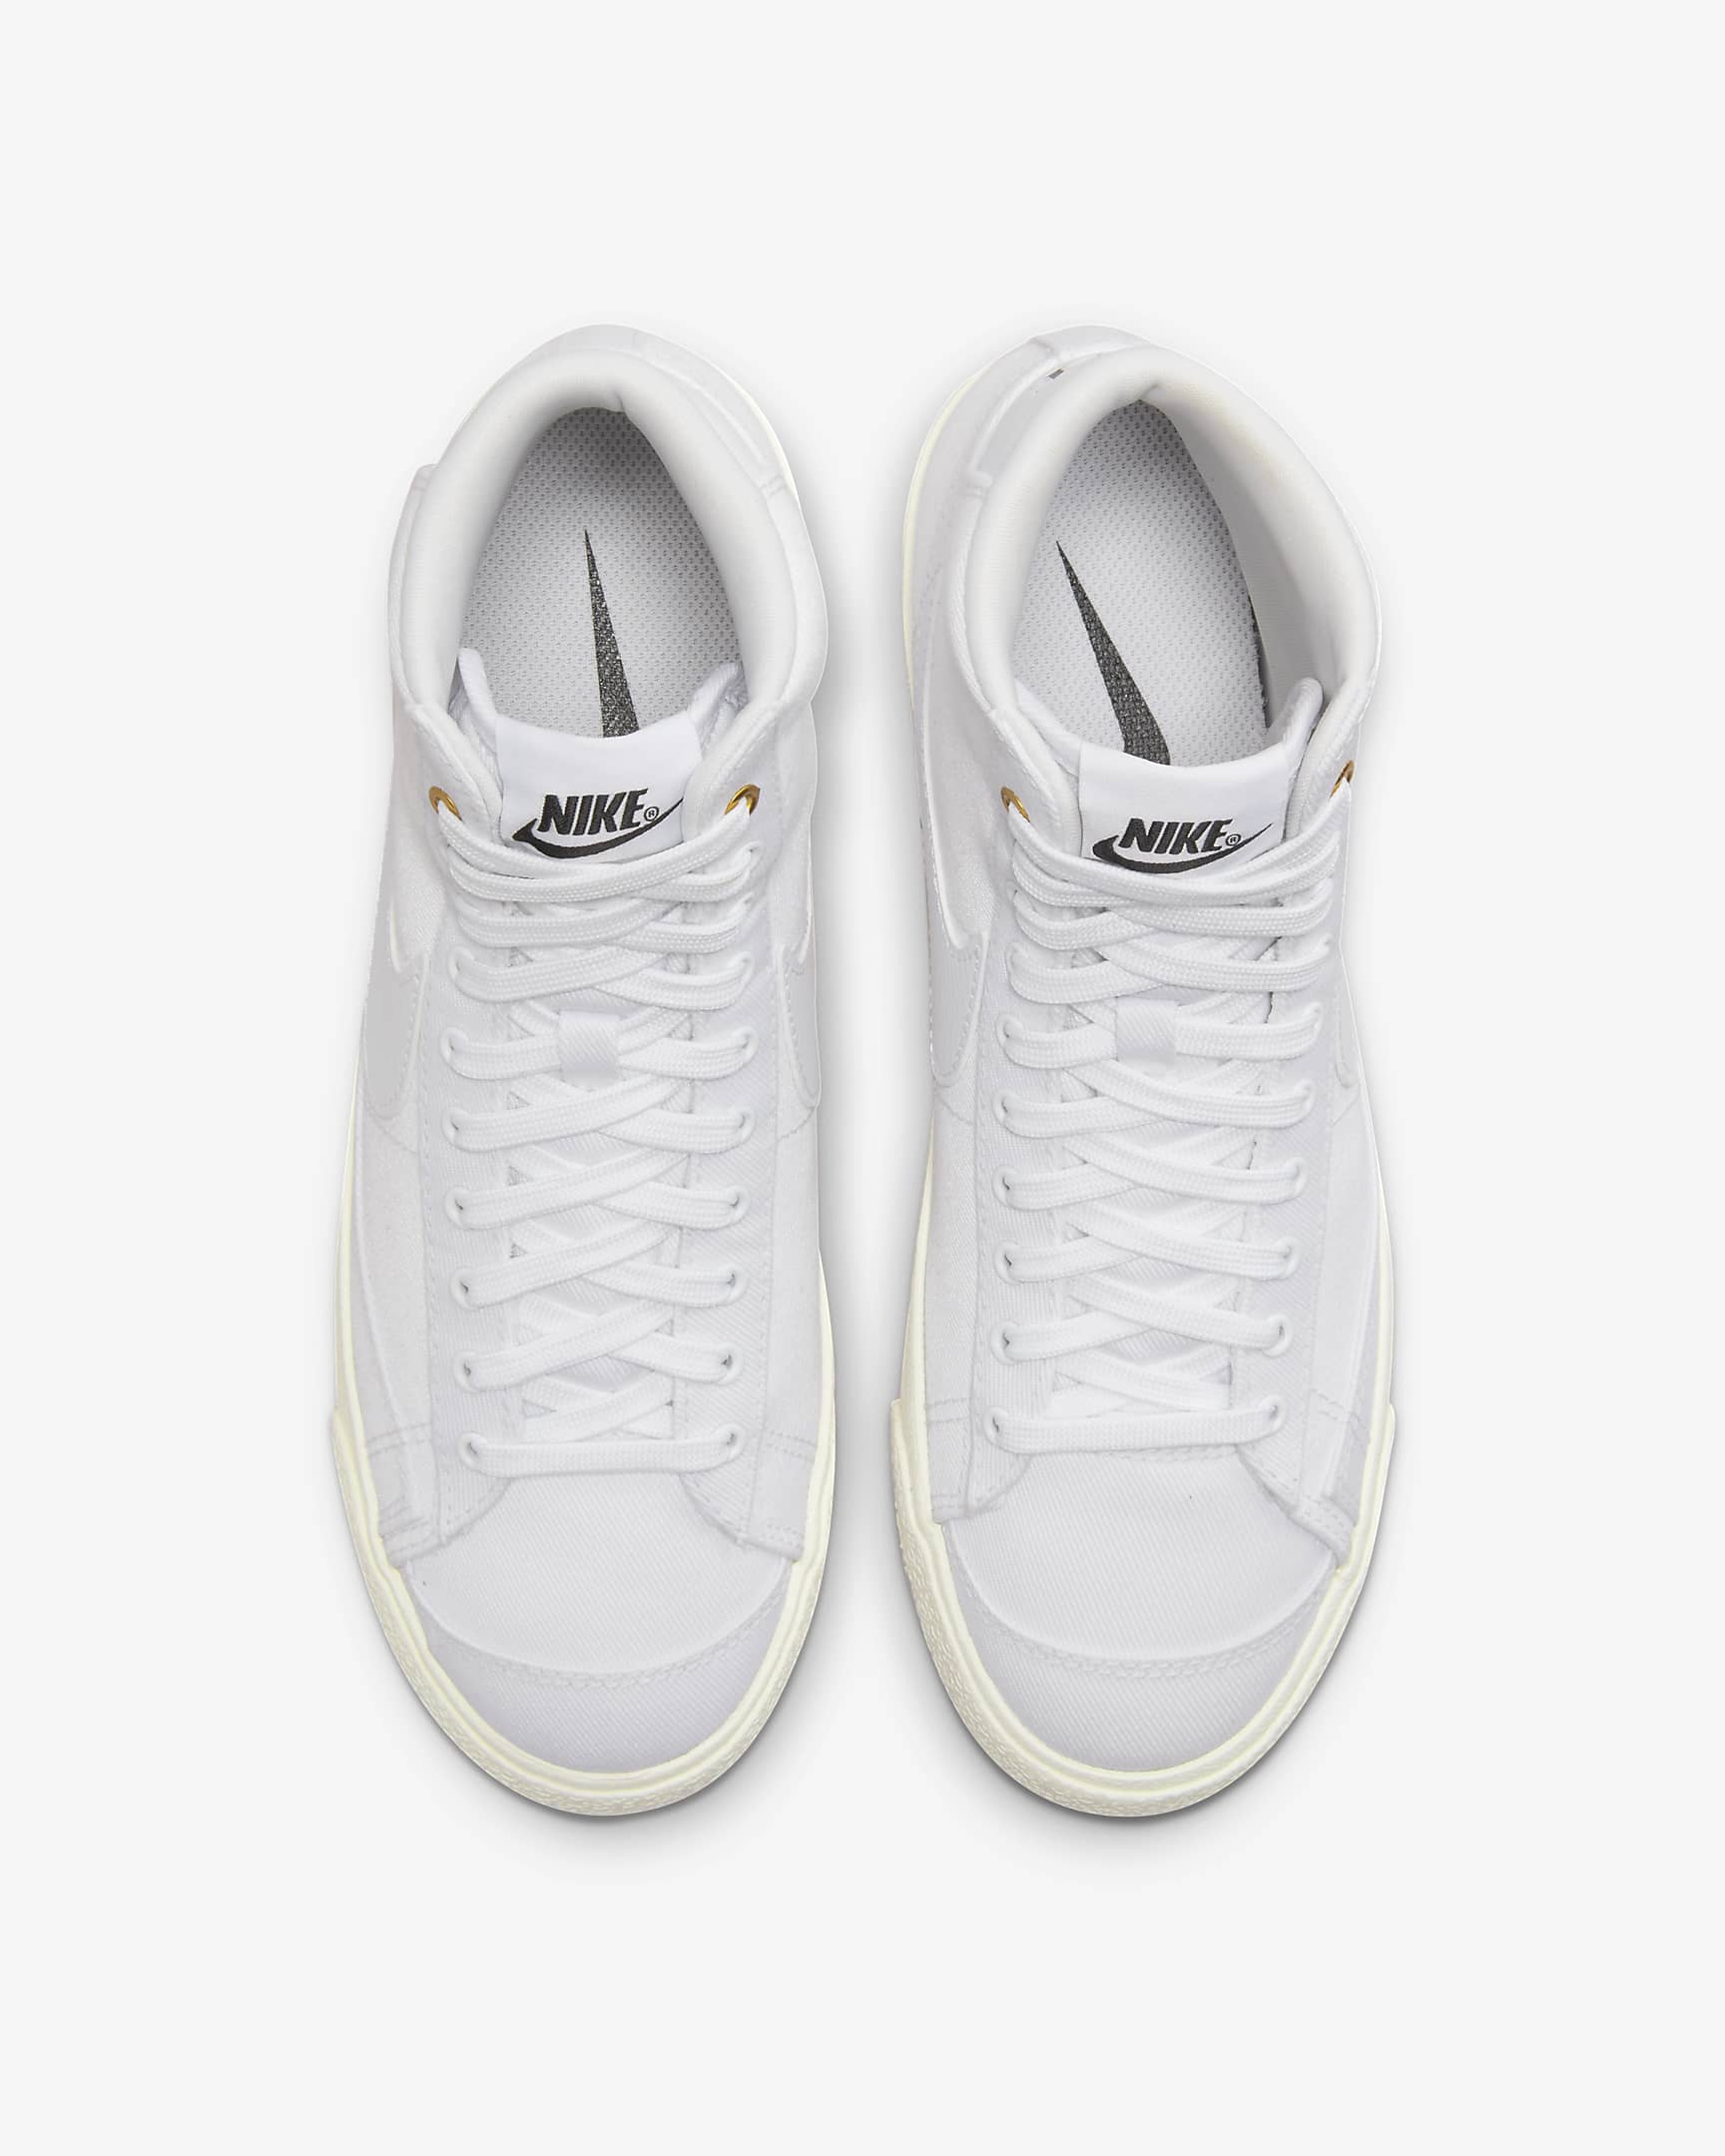 Exclusive Insider Insights: Nike Blazer Mid ’77 Canvas Women’s Shoes Review – What They Don’t Tell You!